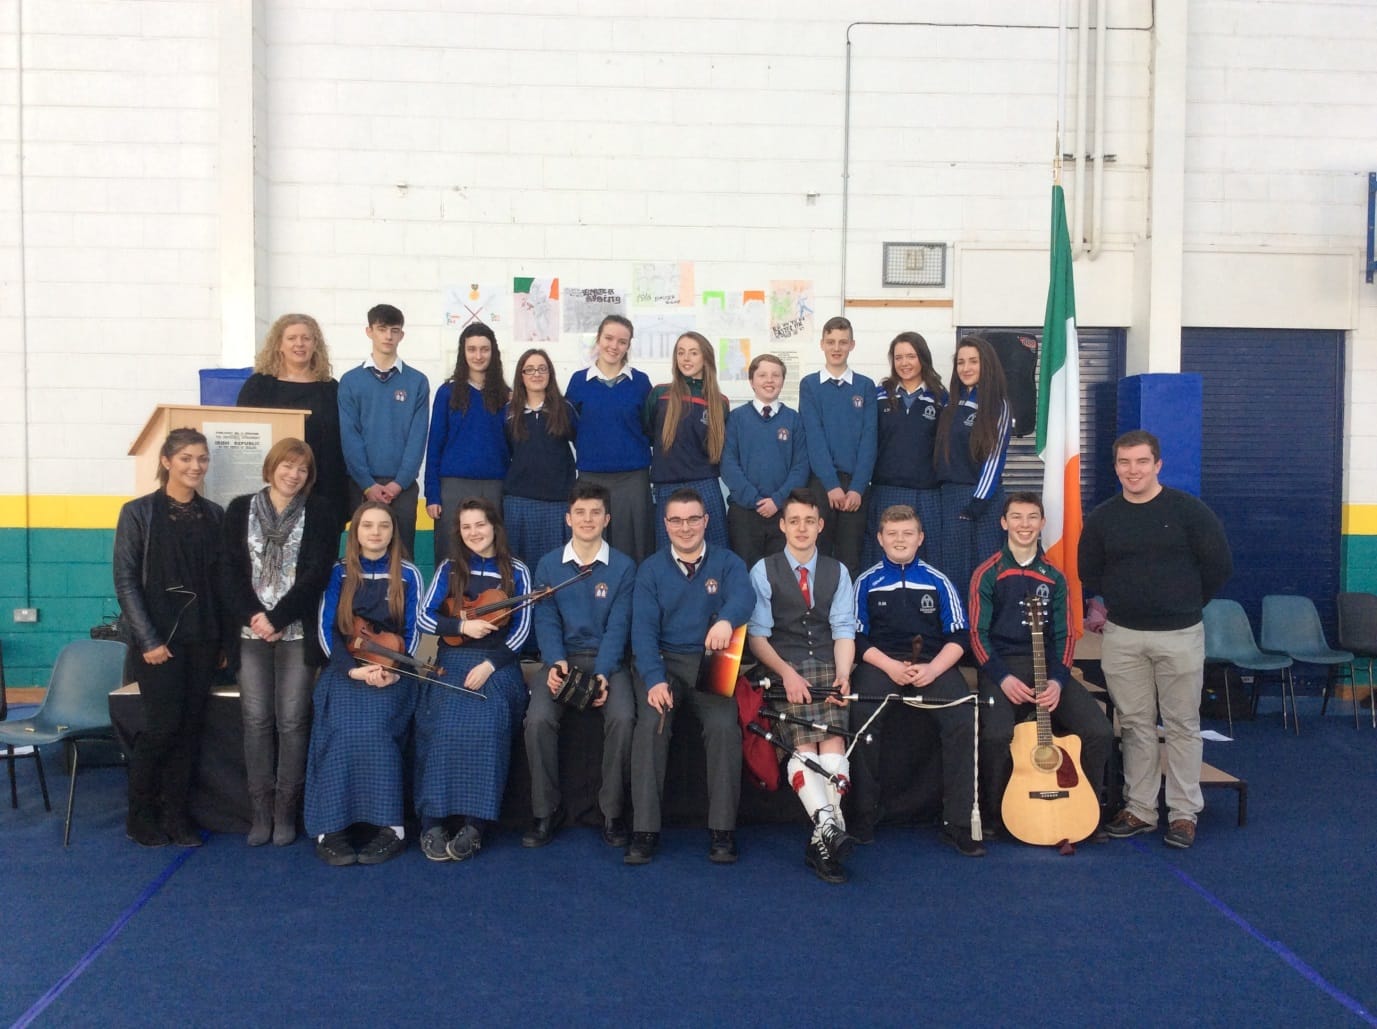 March 2016: Students and staff that performed at the 1916 commemoration ceremony in Desmond College pictured with school principal Ms. Gavin-Barry